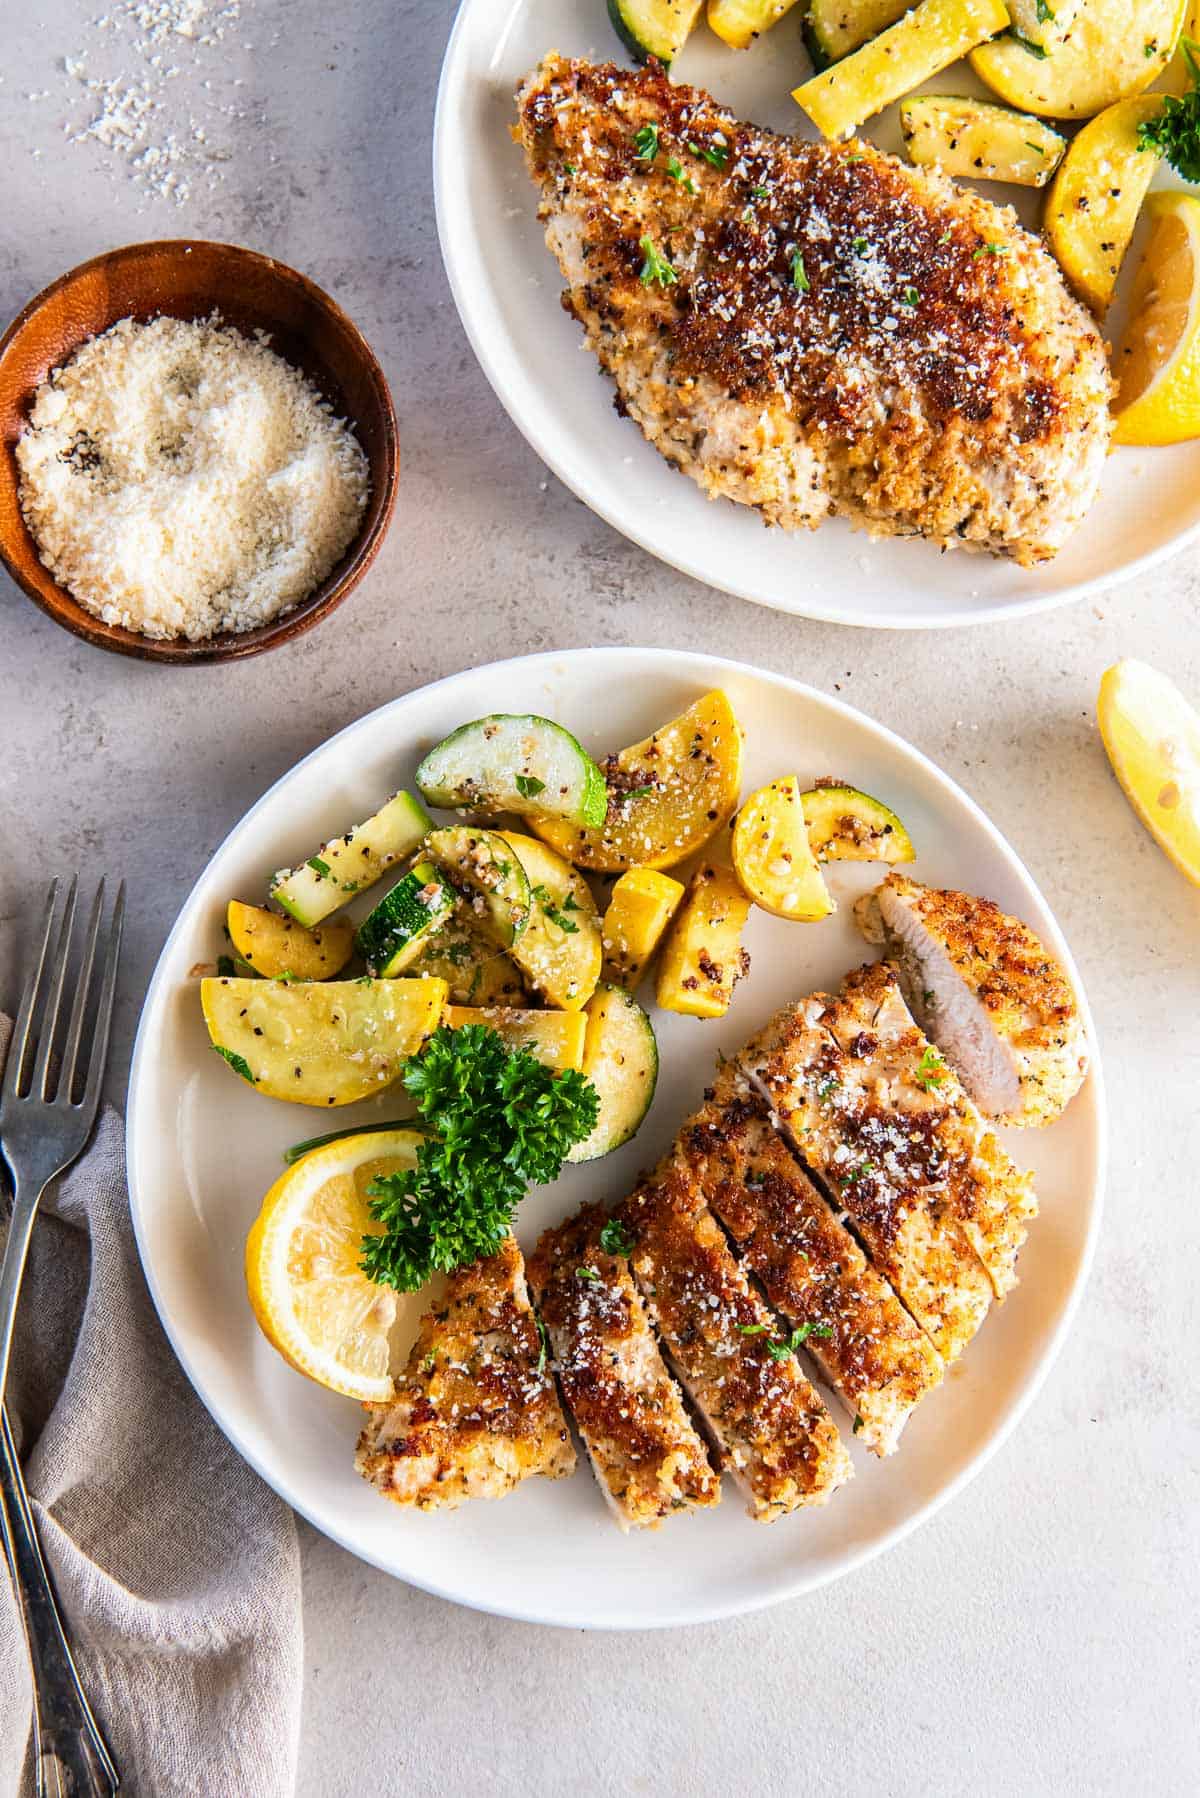 Breaded sliced chicken on a plate with zucchini next to a small bowl of Parmesan.